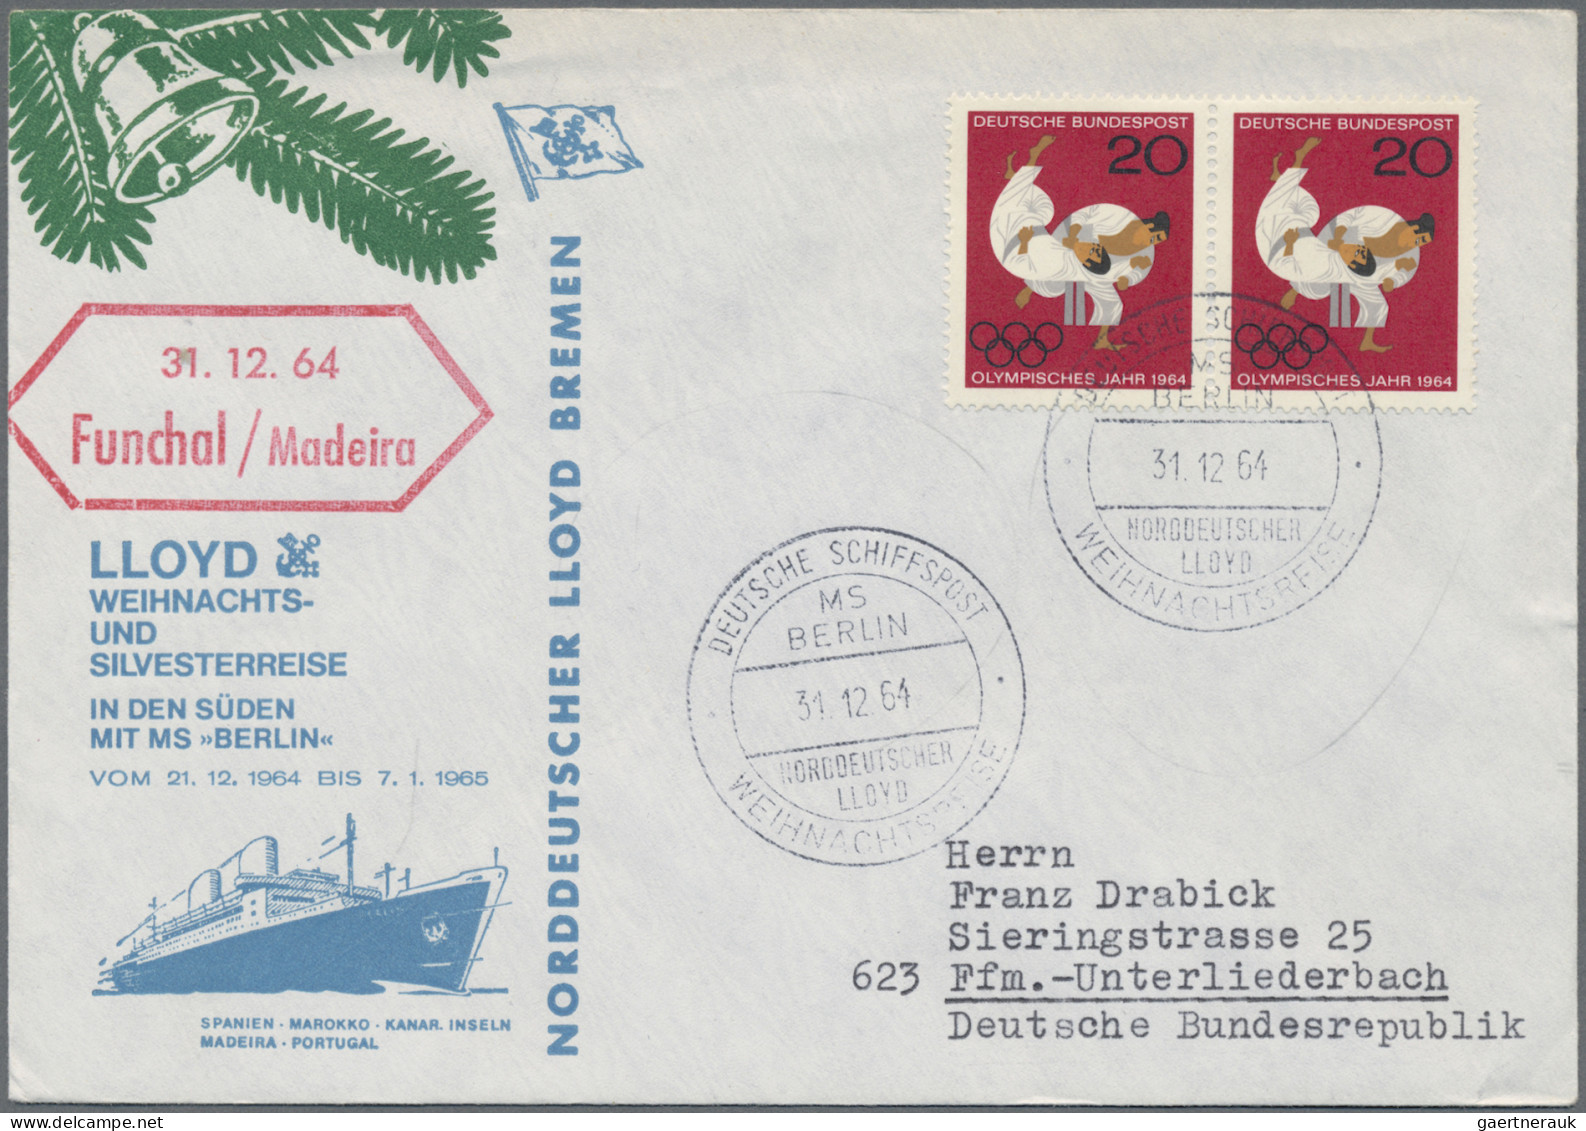 Thematics: ships: 1900/1990 (ca.), sophisticated balance/collection of apprx. 38